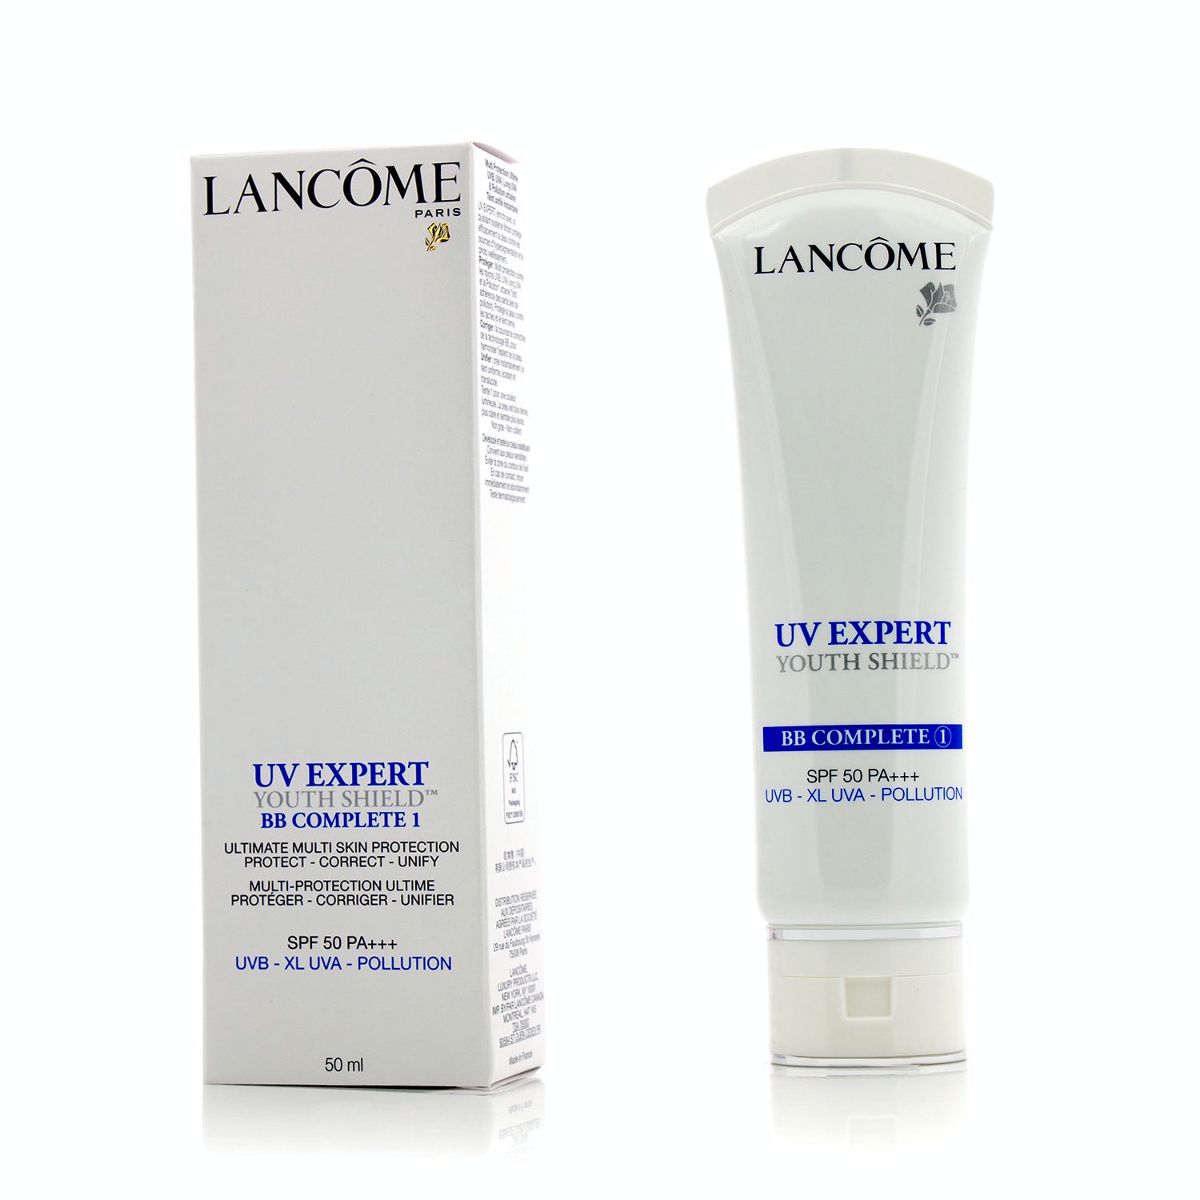 UV Expert Youth Shield BB Complete 1 SPF50 PA+++ - Unify Lancome Image